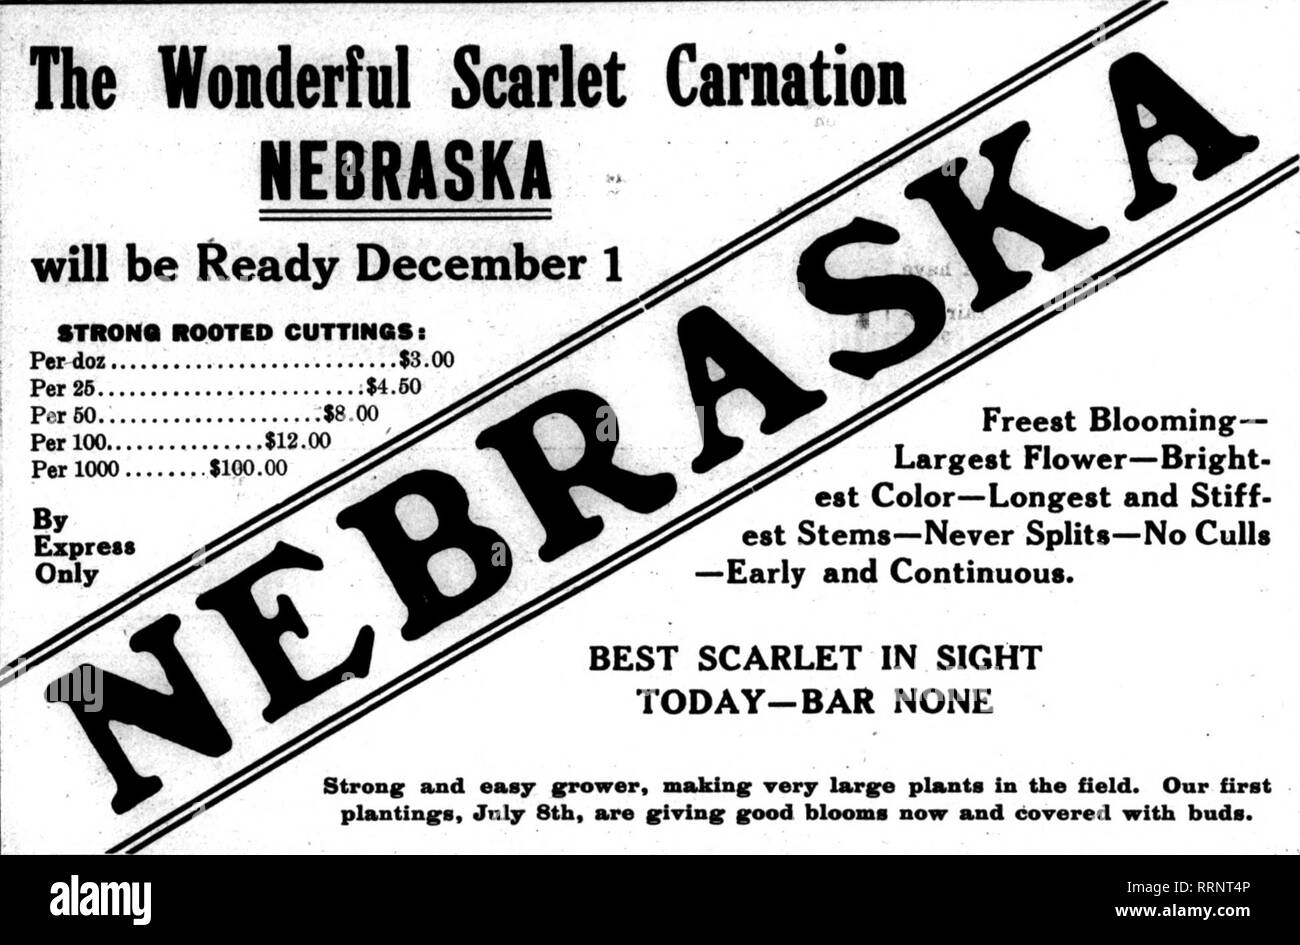 . Florists' review [microform]. Floriculture. NtVBUBSB 11, 1916. The Florists^ Review. The Woiderful Scarlet Carution HEBRHSKA . will be Ready December 1 STROMA ROOTED CUTTINQSi Per doz $3.00 Per25 $4.50 ^y^^ ^^^^^ P« 50. .^.^.^. -^'^^^^g^^^ ^ ^^^ Freest Blooming- Per 1000.'.*.*.*;.&quot;.'.'$100'.00 ' .j^^ ^^^J^^^ ^^^^^ Largest Flower—Bright- ^^ ^^ ^ ^^^^^^^^y^^^ *•' Color—Longest and Stiff- Express .^^^ ^^^^^^ ^P^.&gt;^^^ *** Stems—Never Splits—No Culls Only ^y^^^^^^^ ^K ^F .^^^ —Early and Continuous. BEST SCARLET IN SIGHT TODAY-BAR NONE Stroner and eaay grower, makings very larg^e plants in Stock Photo